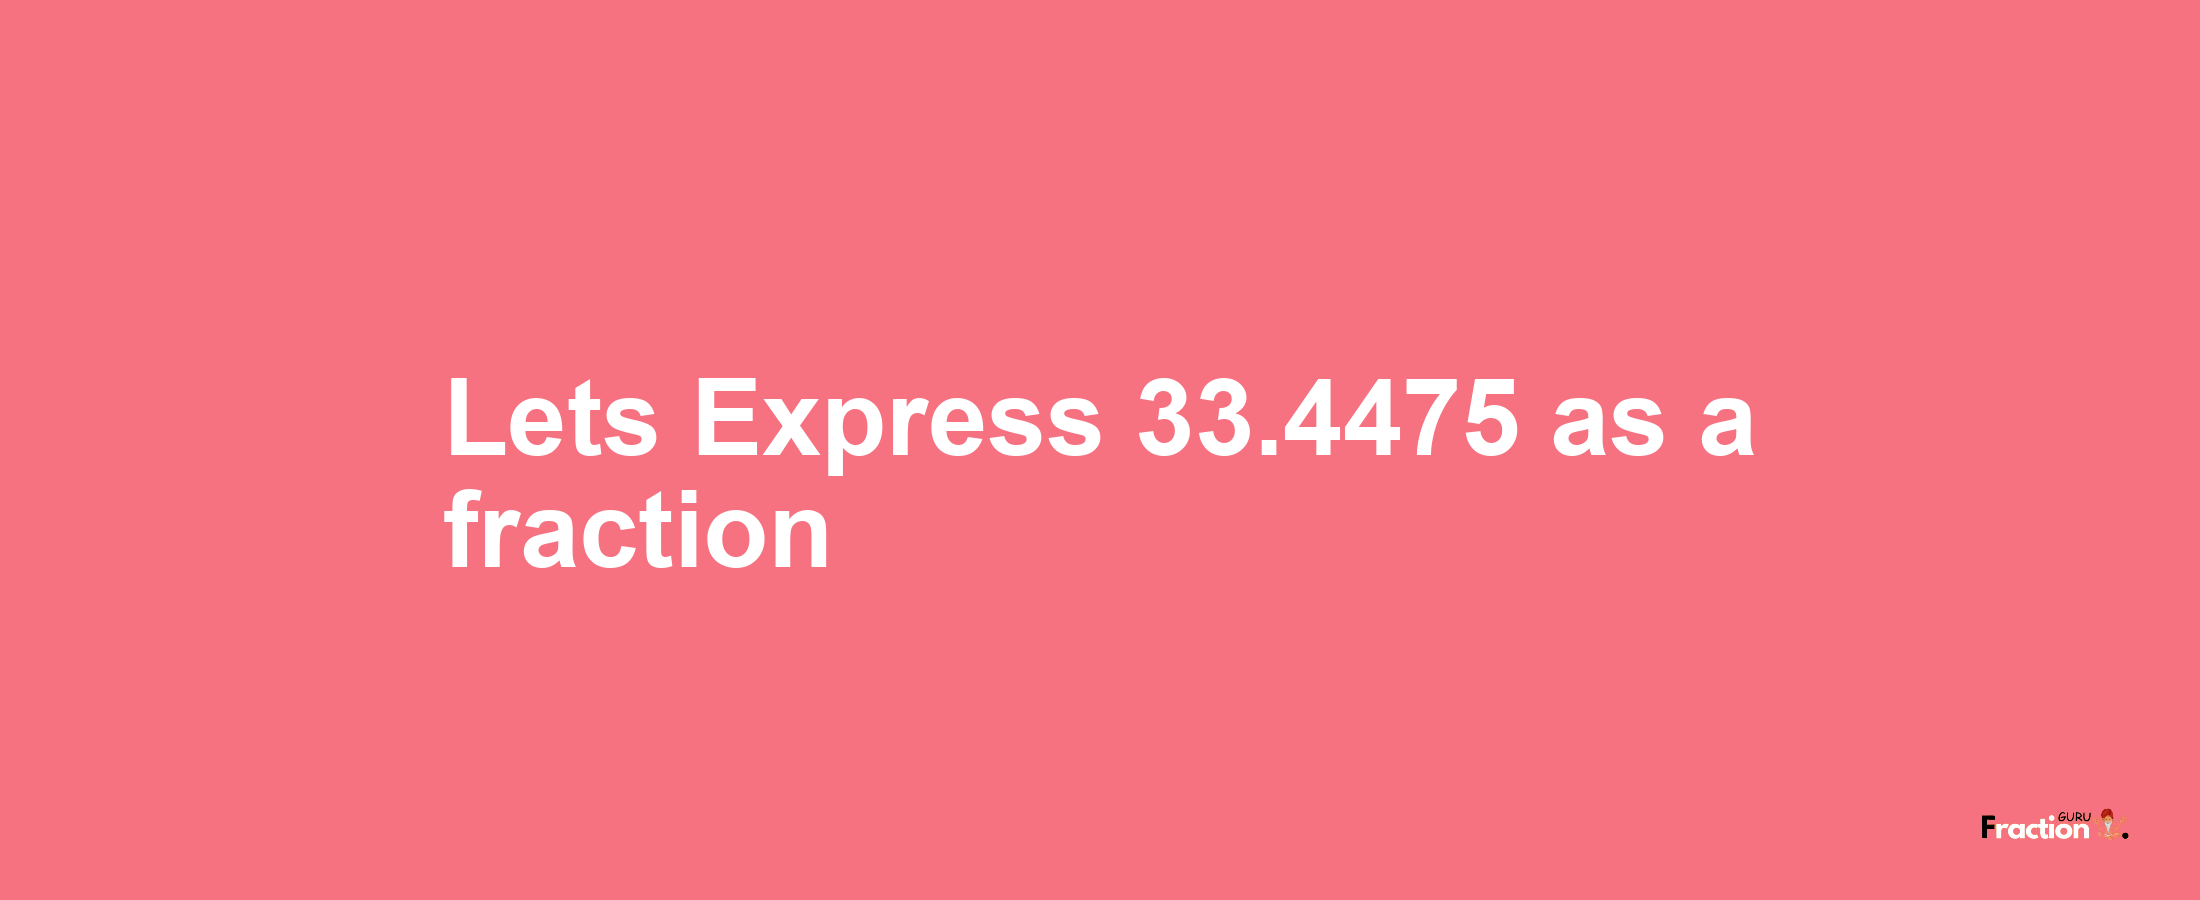 Lets Express 33.4475 as afraction